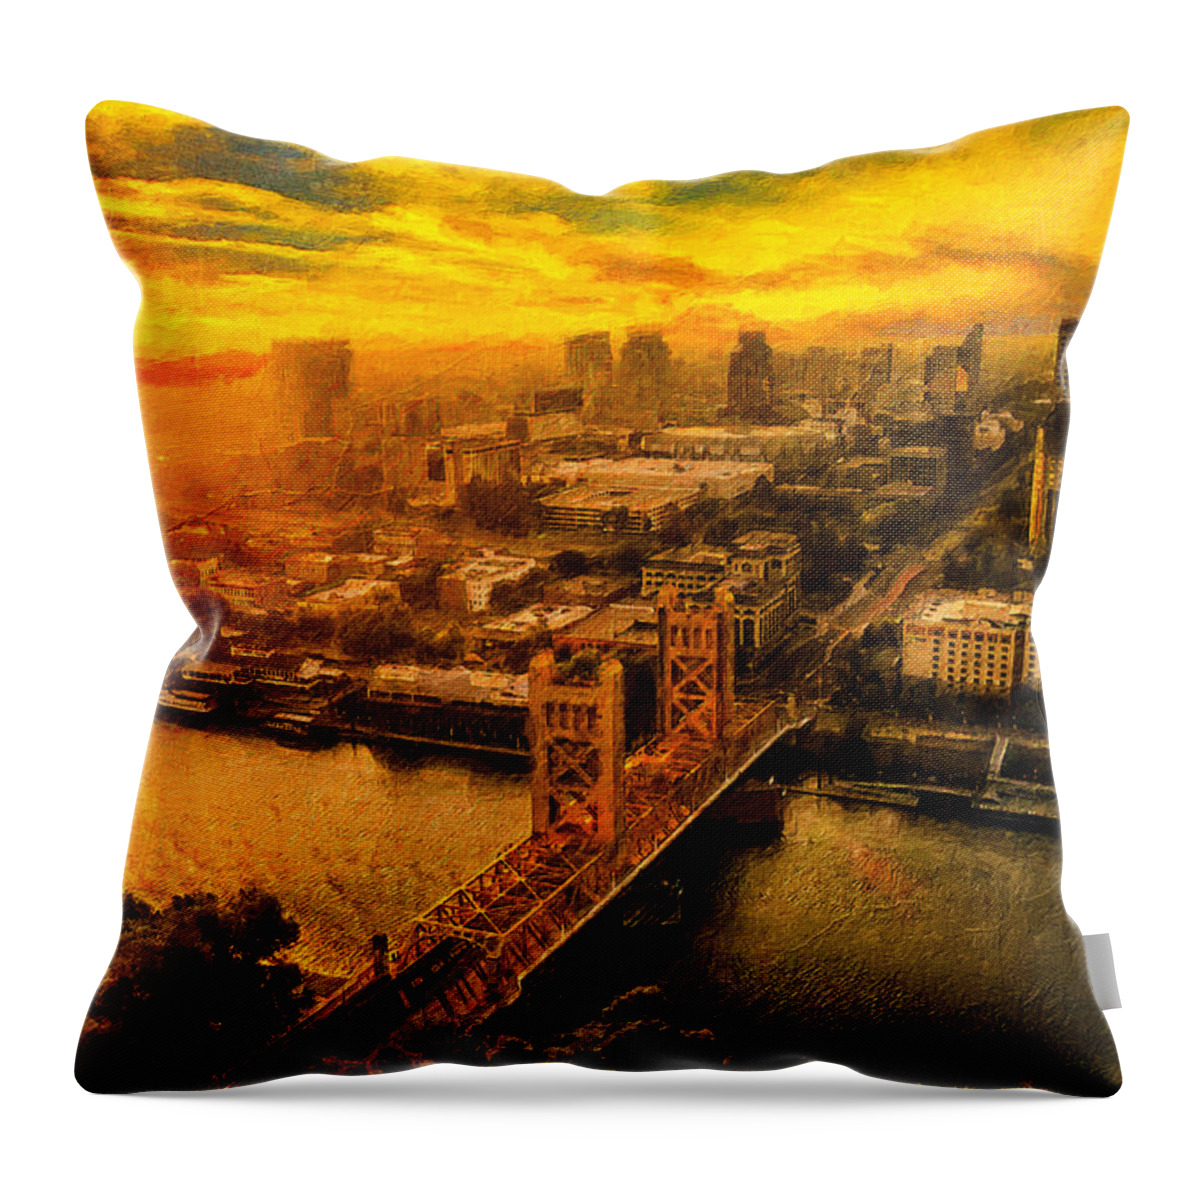 Sacramento Throw Pillow featuring the digital art Downtown Sacramento and Tower Bridge at sunset - digital painting by Nicko Prints